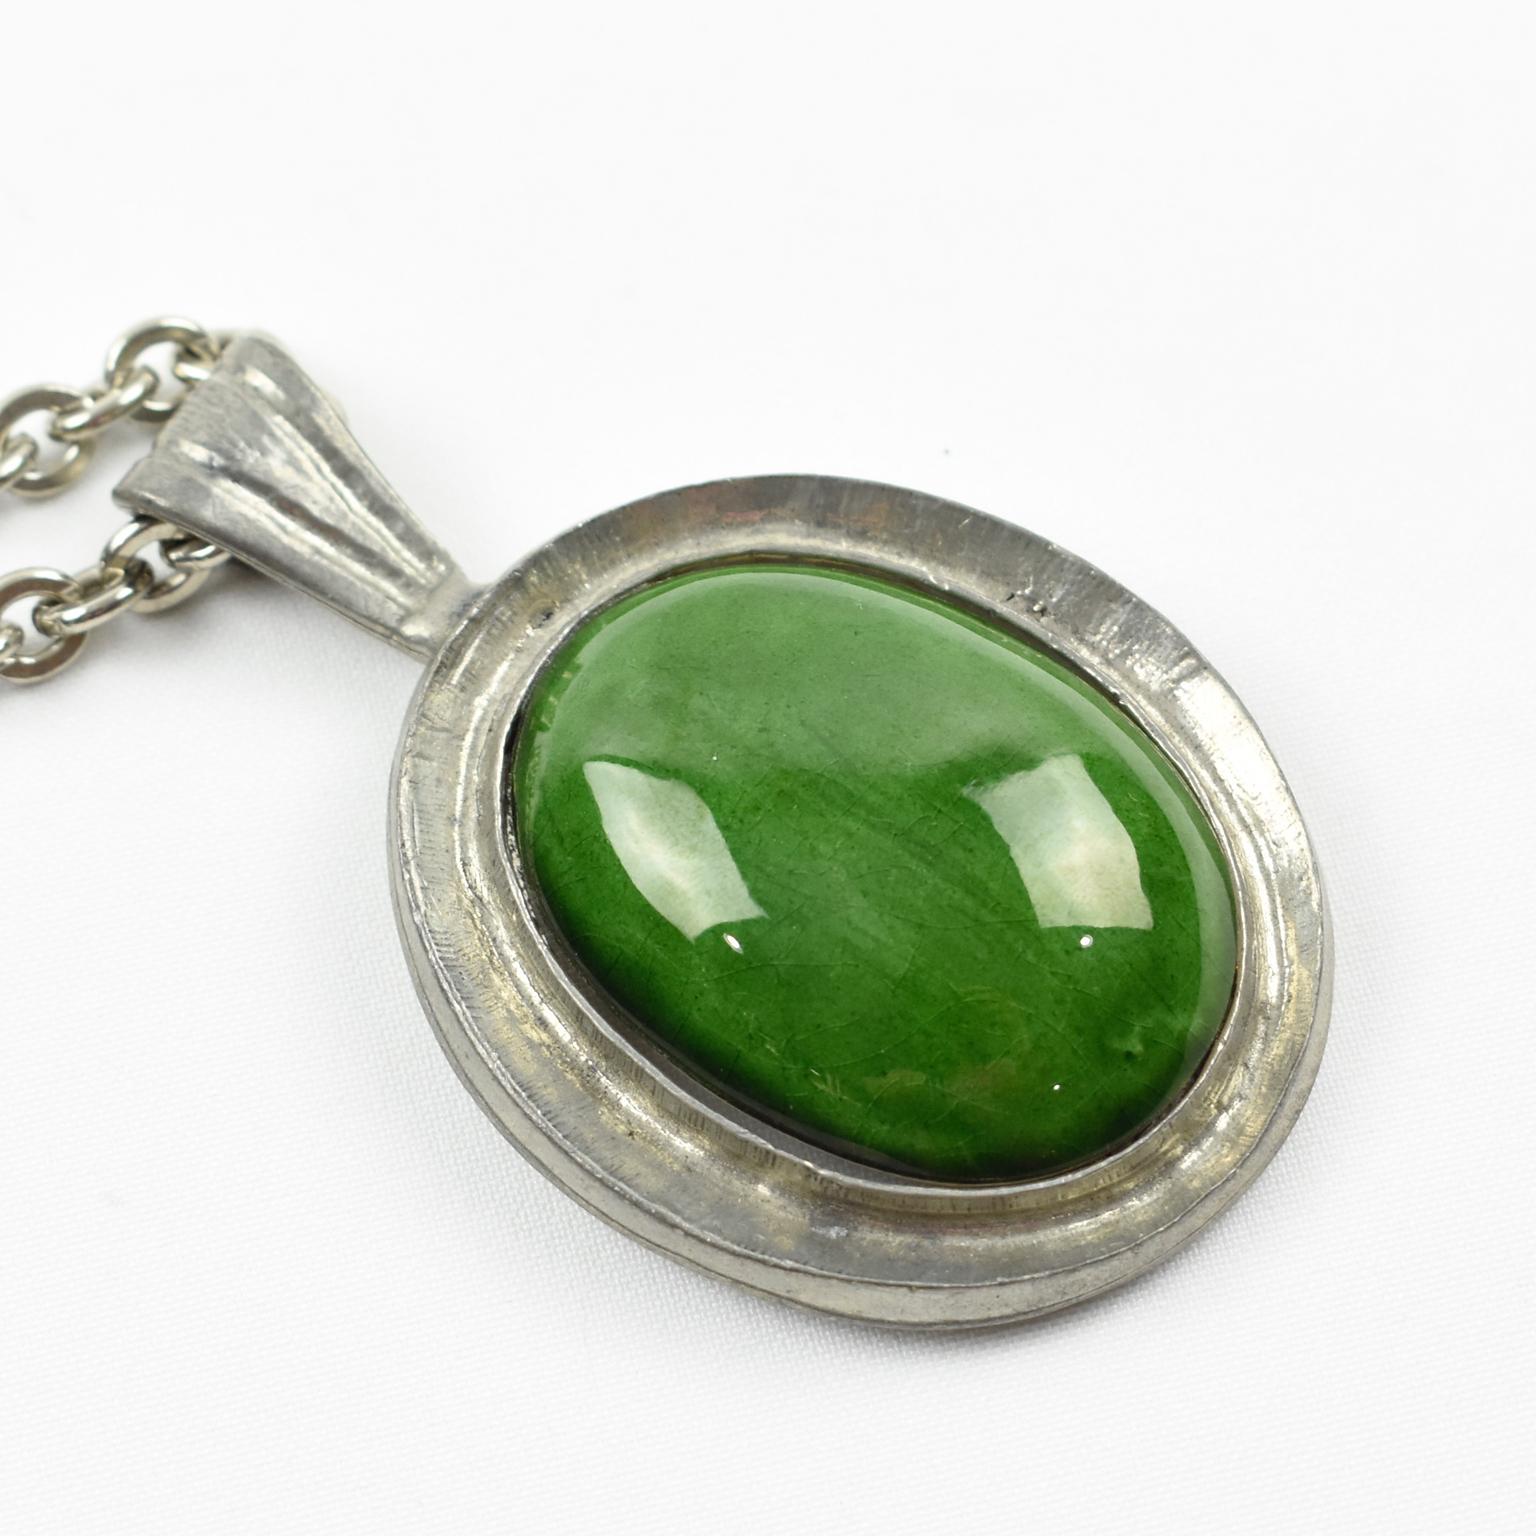 Space Age Pewter Necklace with Green Ceramic Pendant For Sale 3